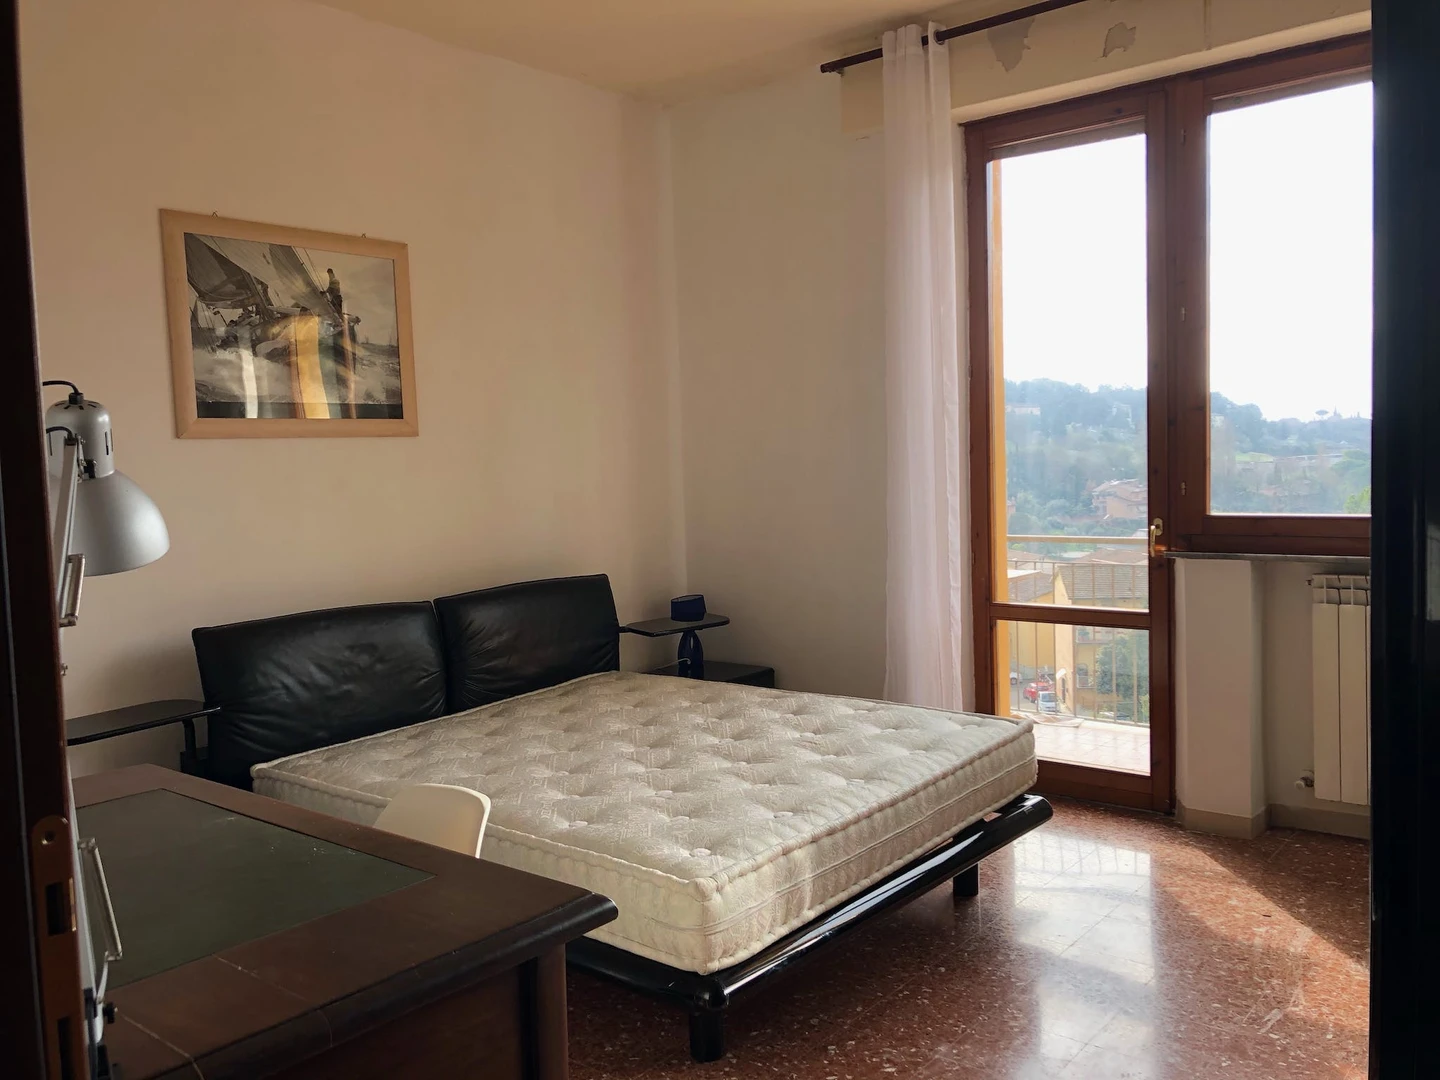 Room for rent in a shared flat in Siena